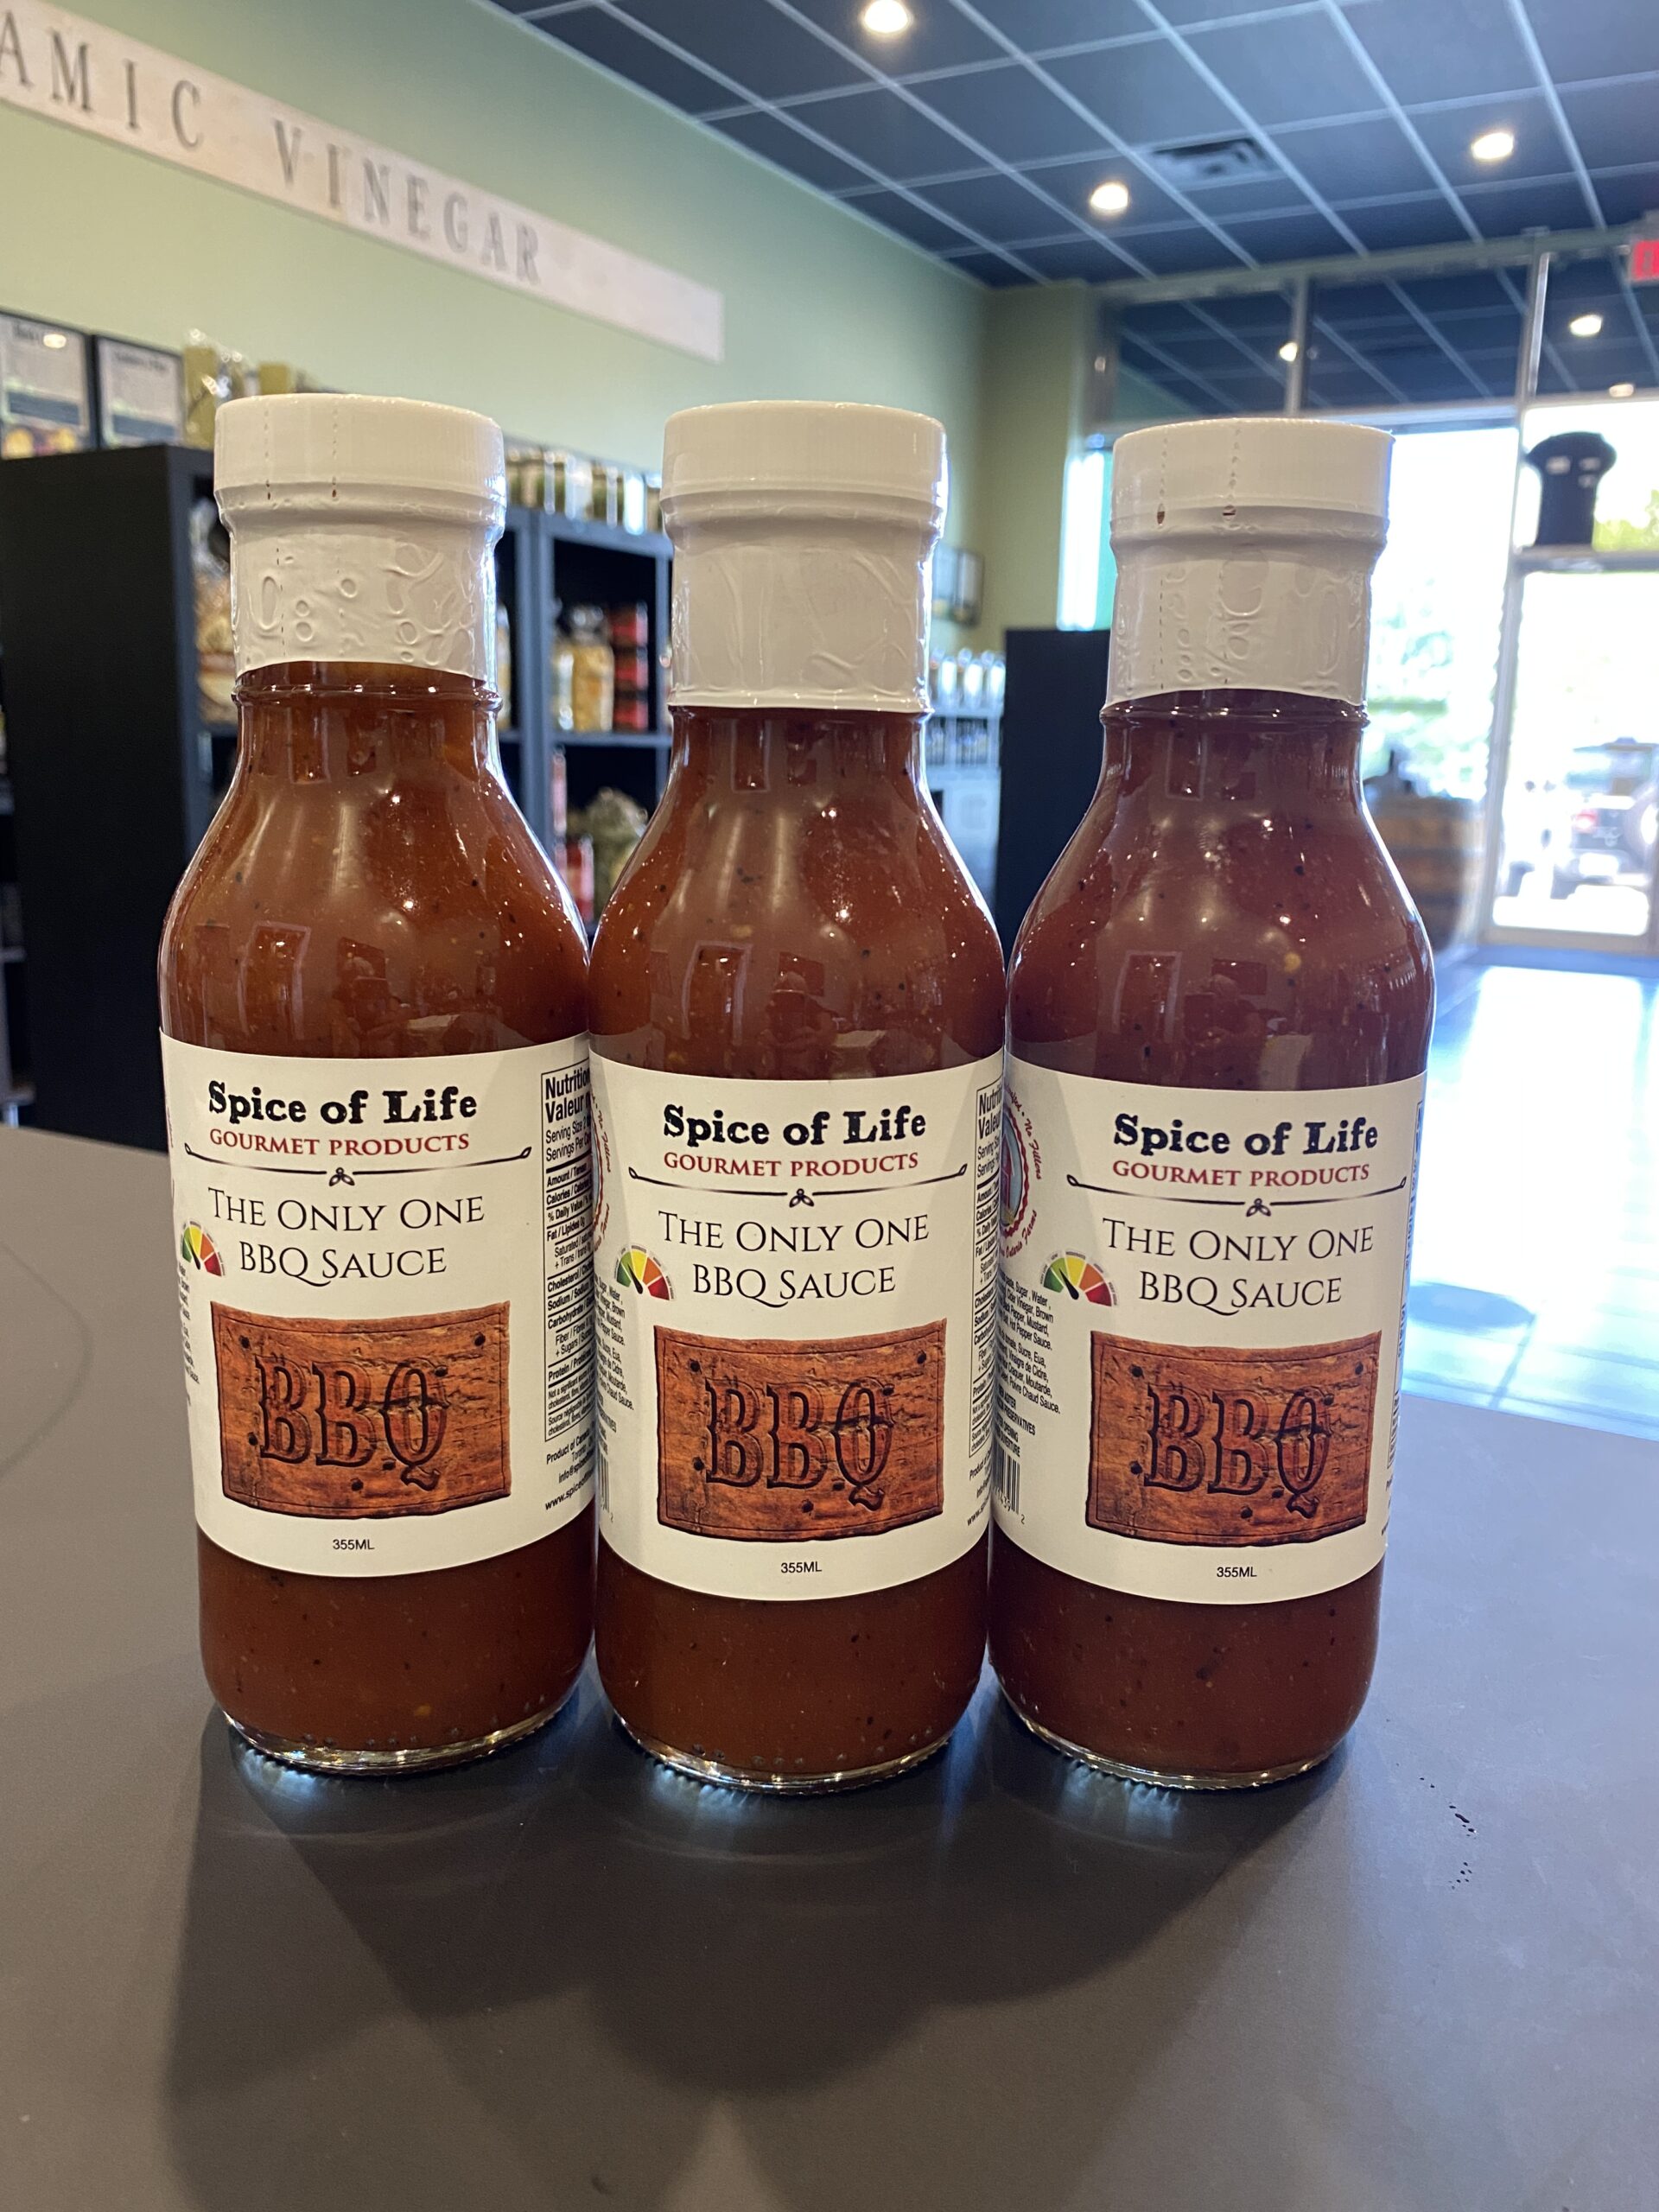 Spice of Life BBQ Sauce – The Only One